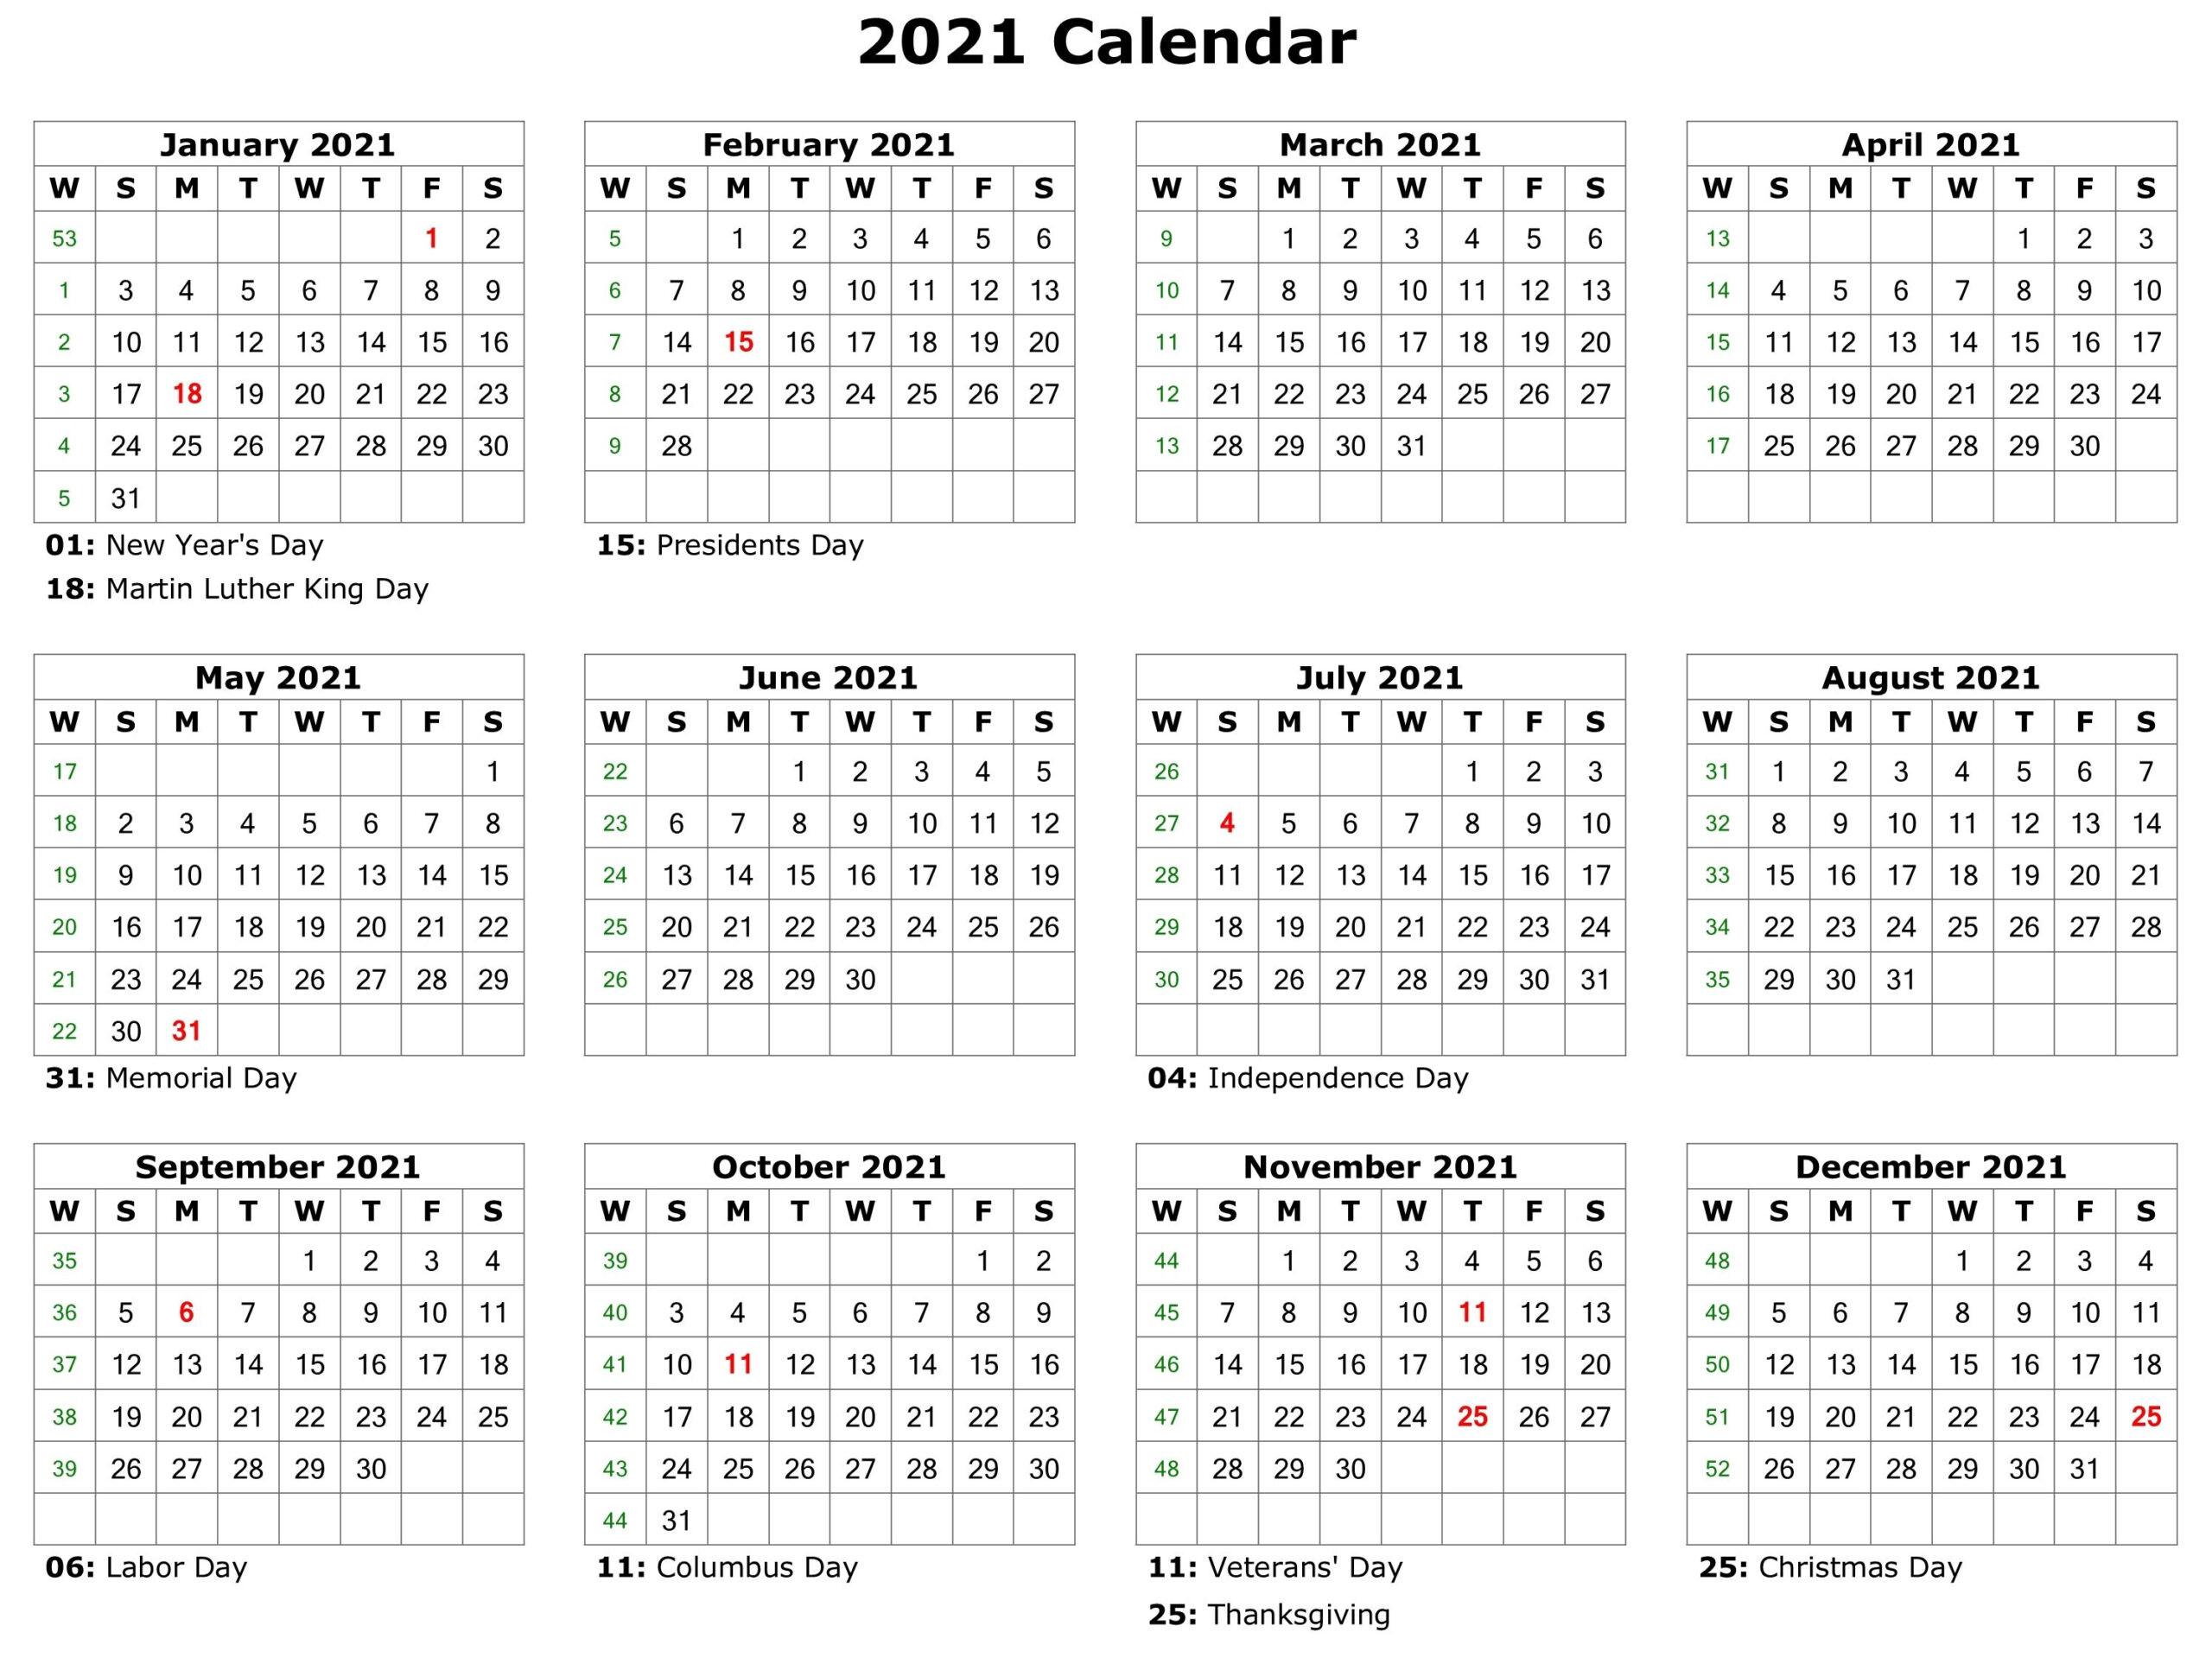 Free Print 2021 Calendars Without Downloading | Calendar-Print Free Calendars Without Downloading 2021